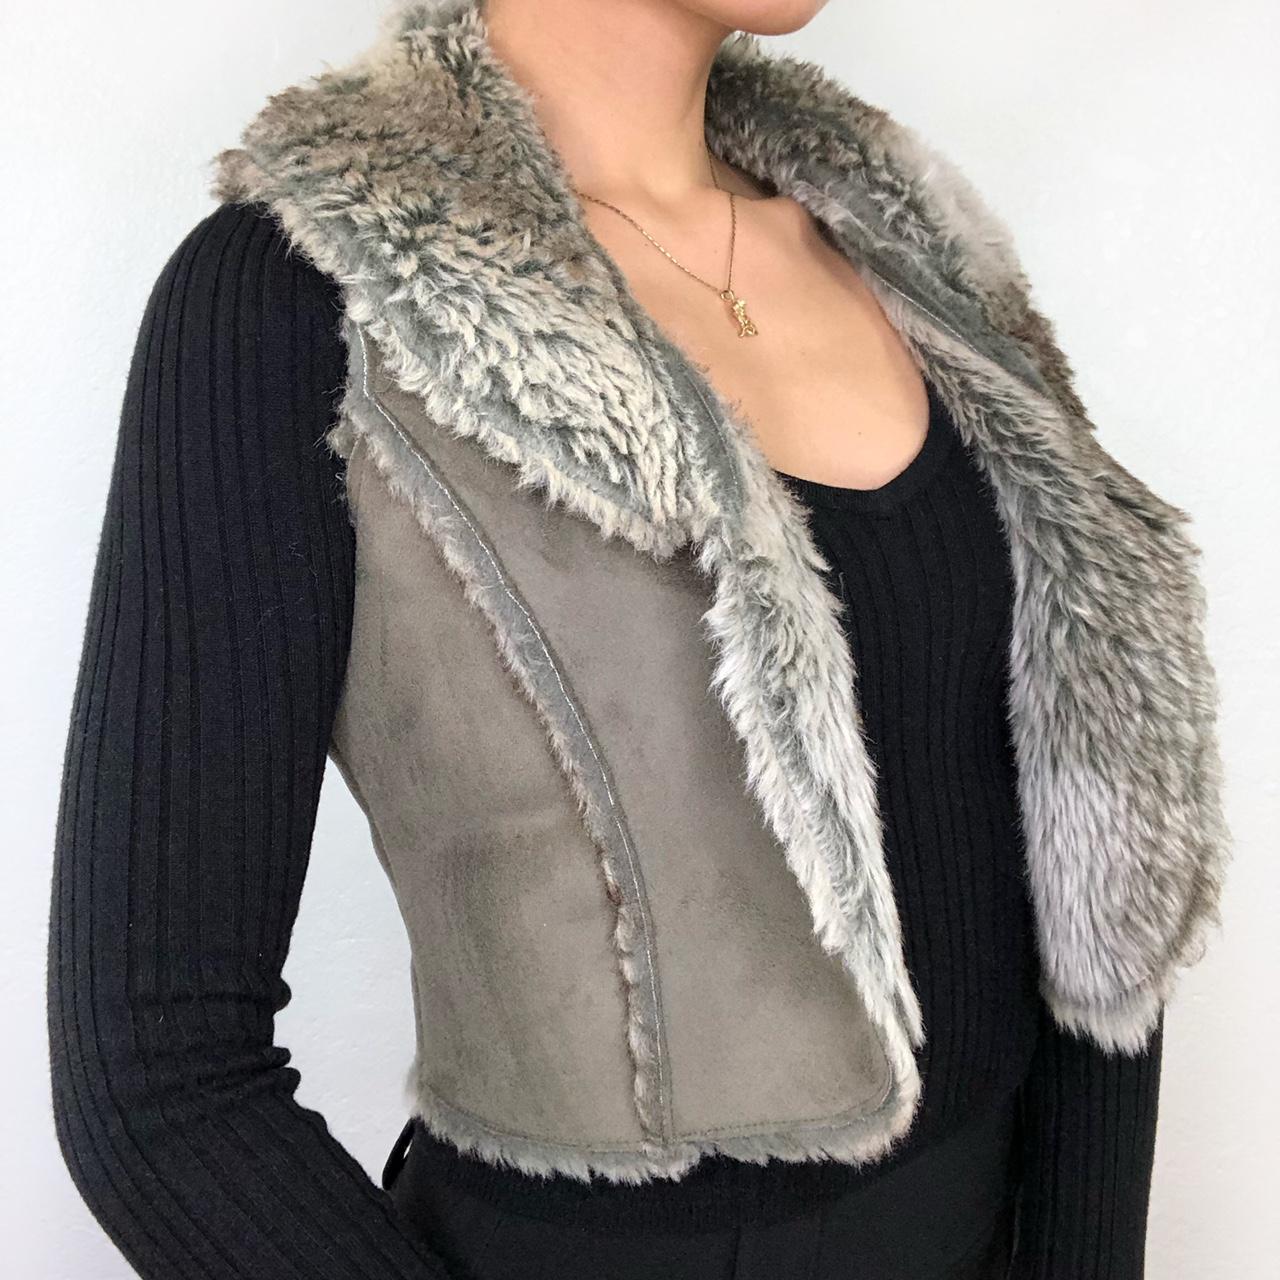 Mudd Faux Fur lined vest 🖤 VERY warm and cozy cute... - Depop